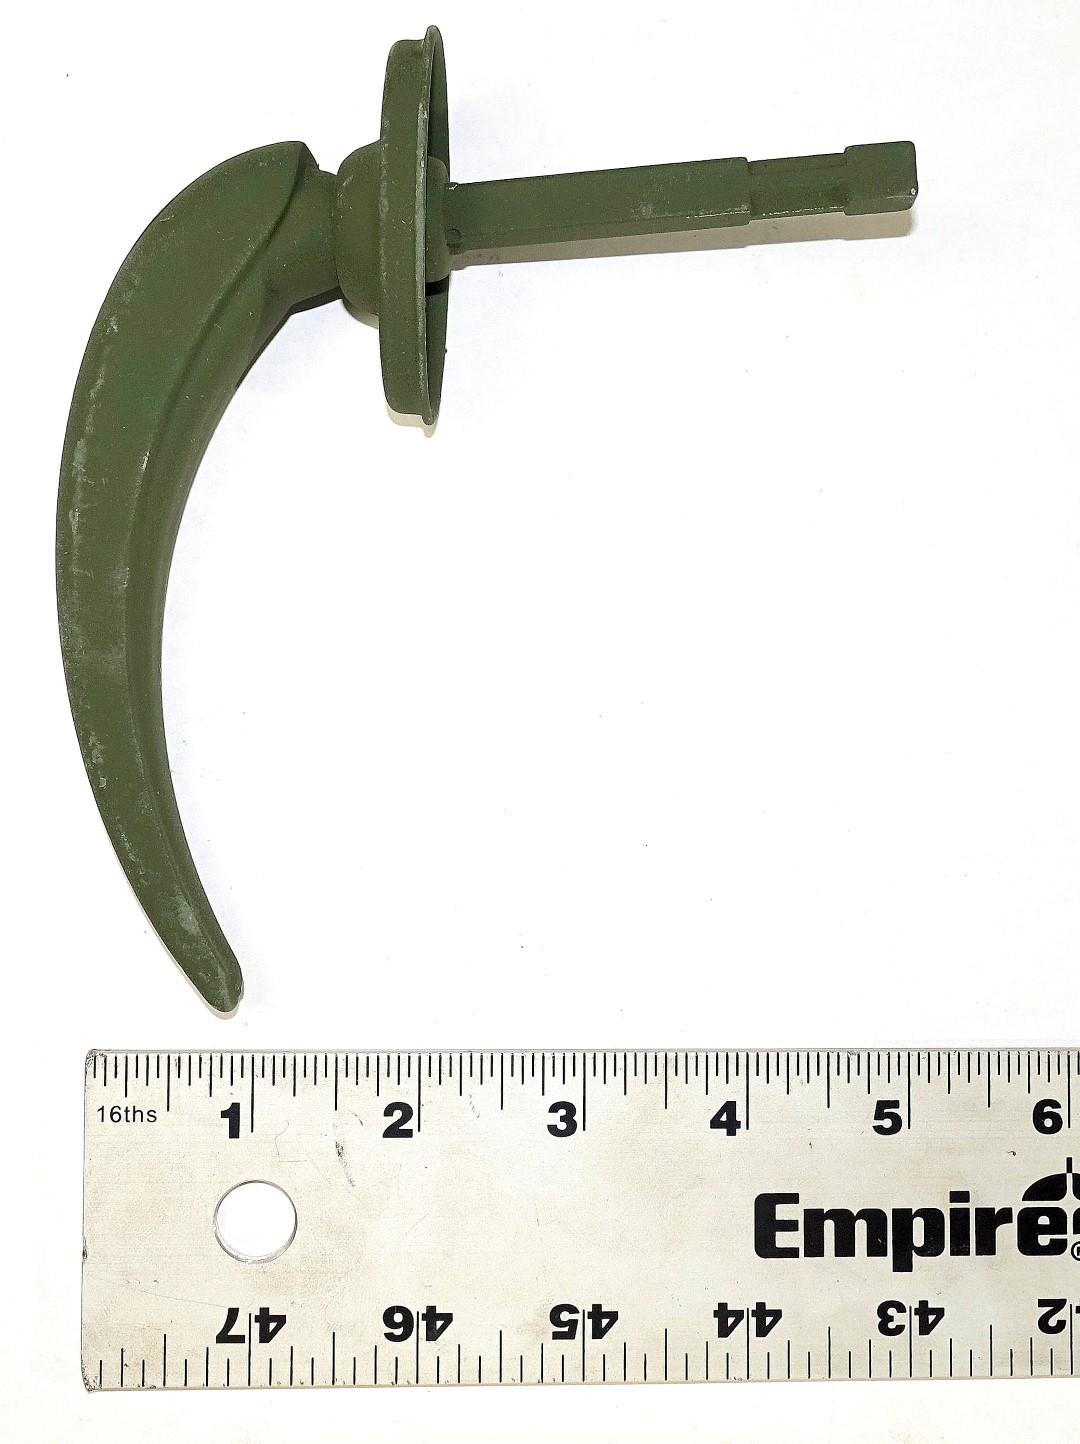 ALL-5011 | 2540-00-741-0715 Outer Door Handle (Green) (3) (Large).JPG